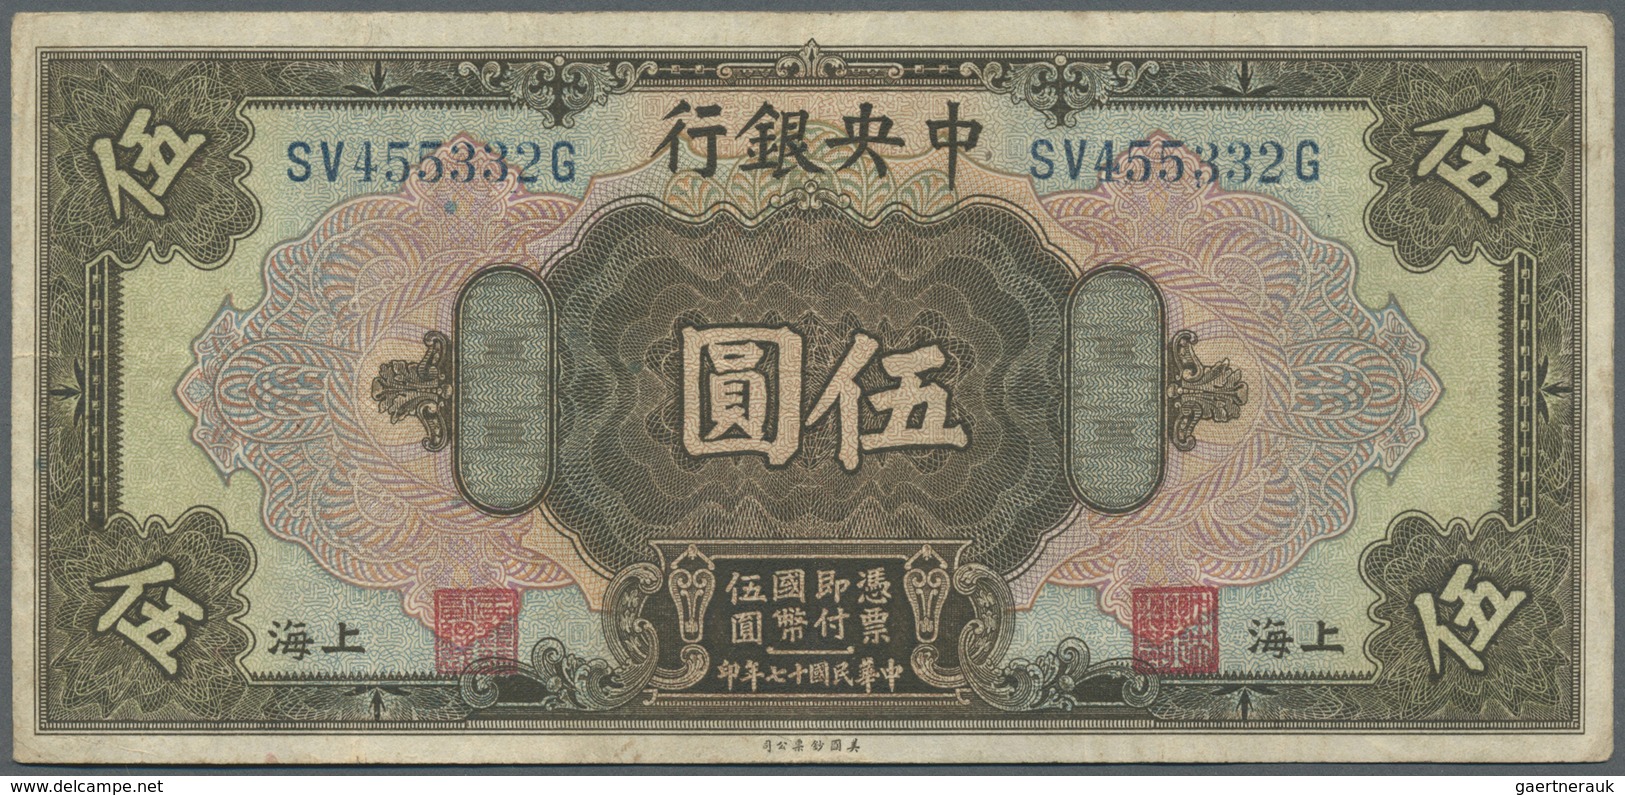 China: 5 Dollars 1928 The Central Bank Of China P. 196d, Used With Several Folds But Still Strong Pa - China